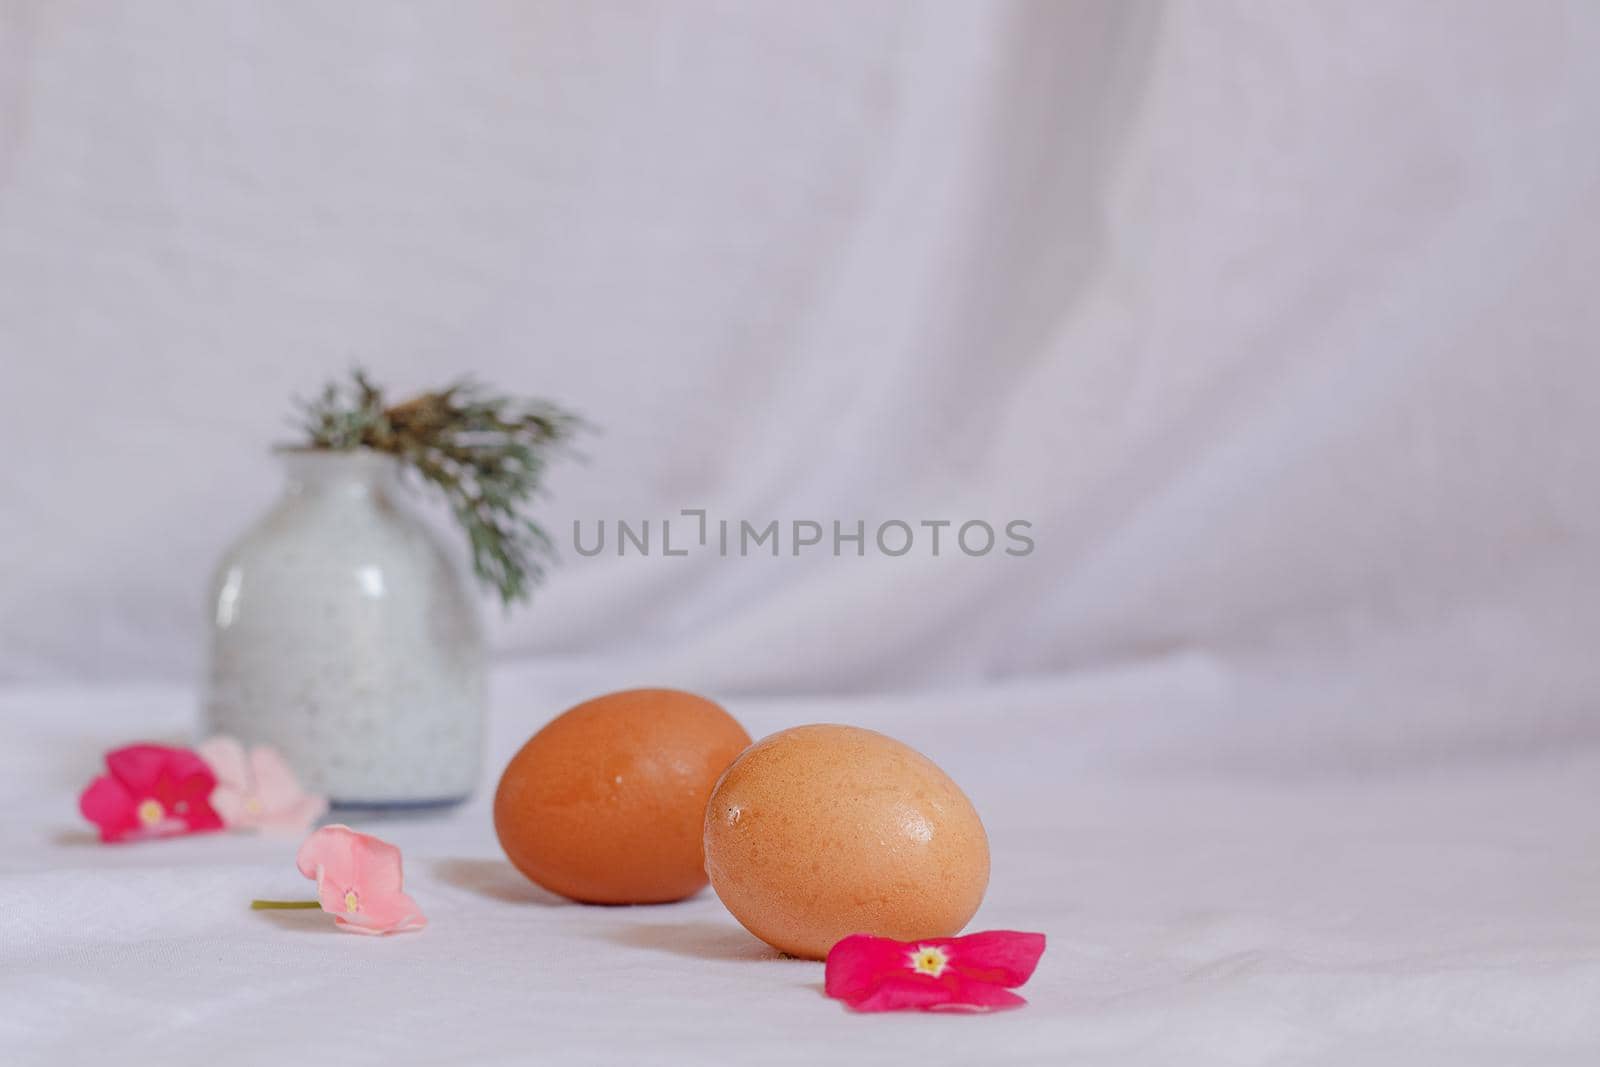 Bright and airy Easter aesthetic still life that conveys the fresh and gentle feelings of Spring season